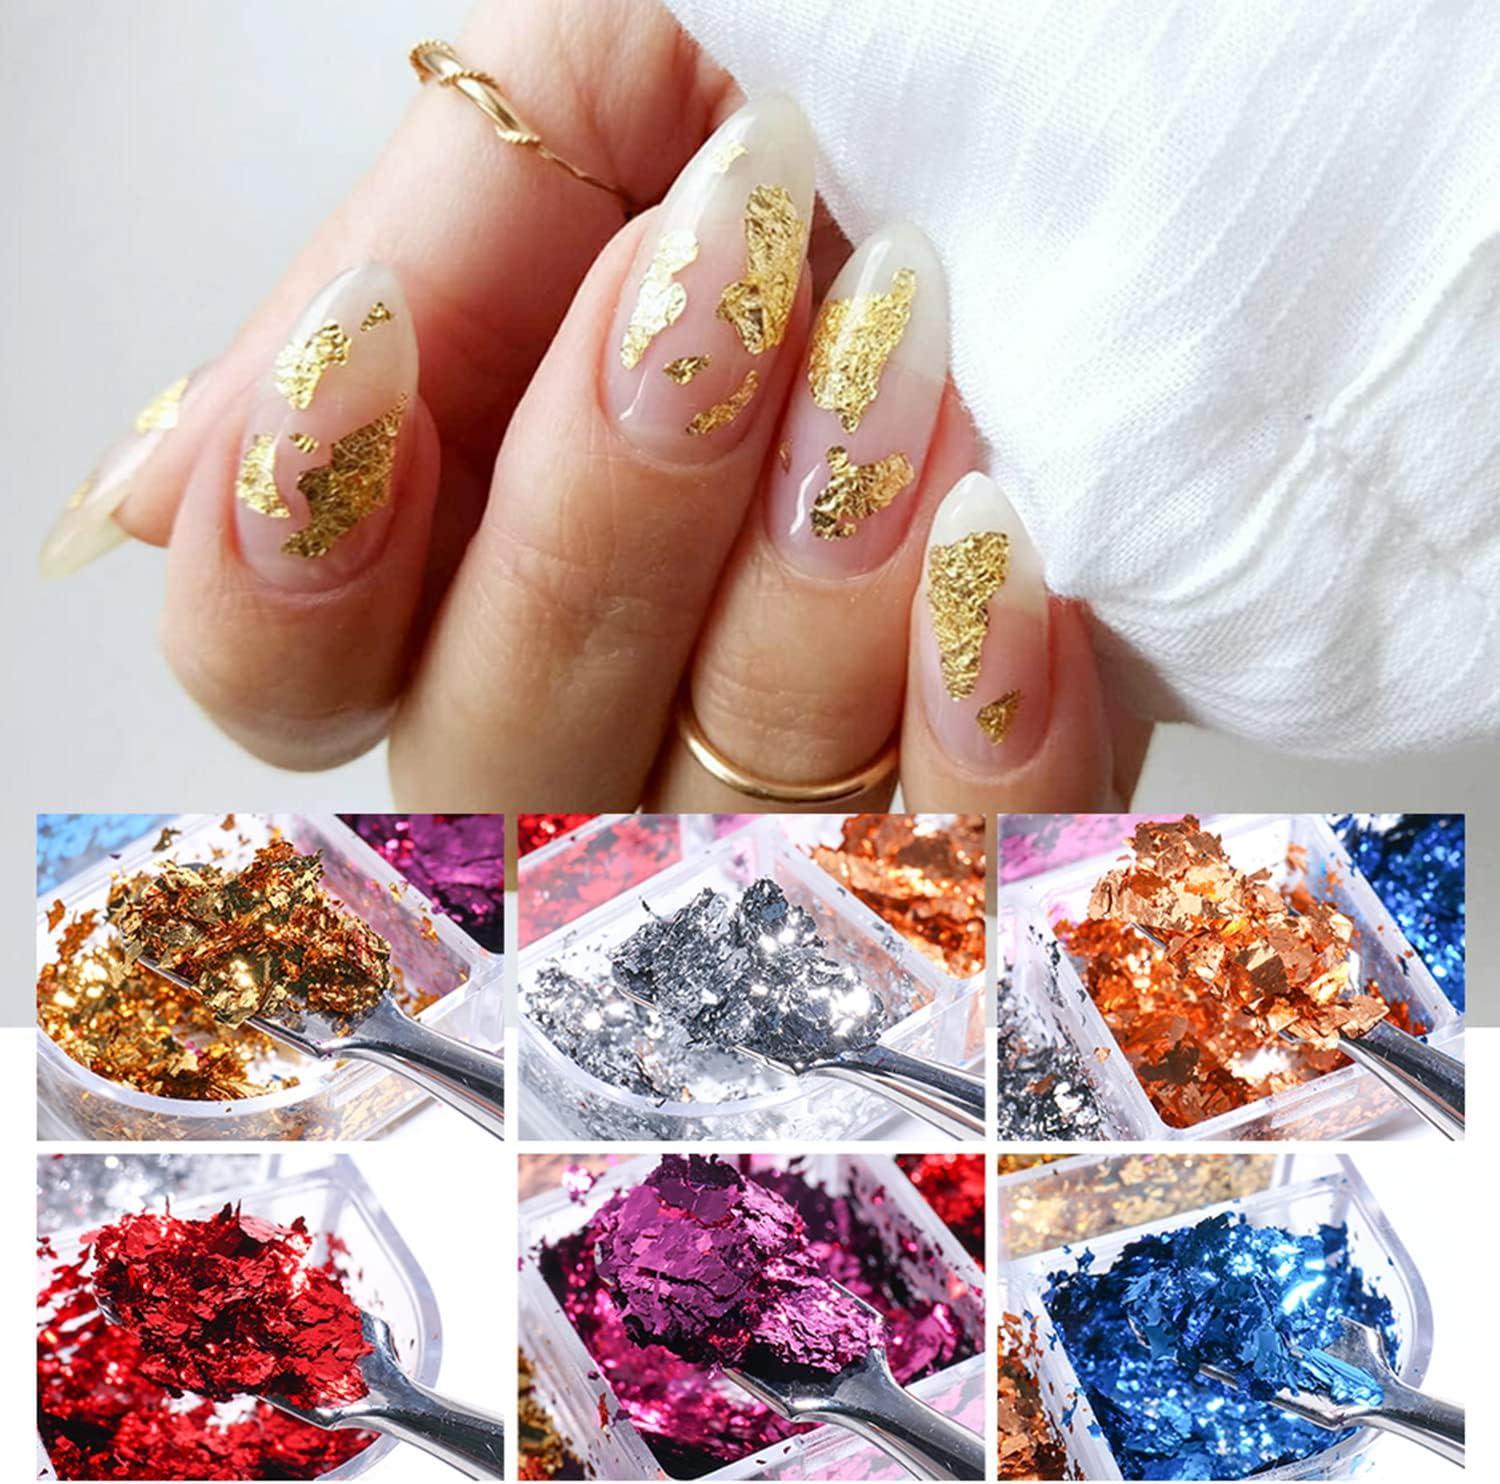 Nail Art Foil Glitter, Gold Holographic Ultra Thin Foil Glitter Design,  Metallic 3D Glitter Nail Foil Supplies, Suitable For Women Girls Manicure